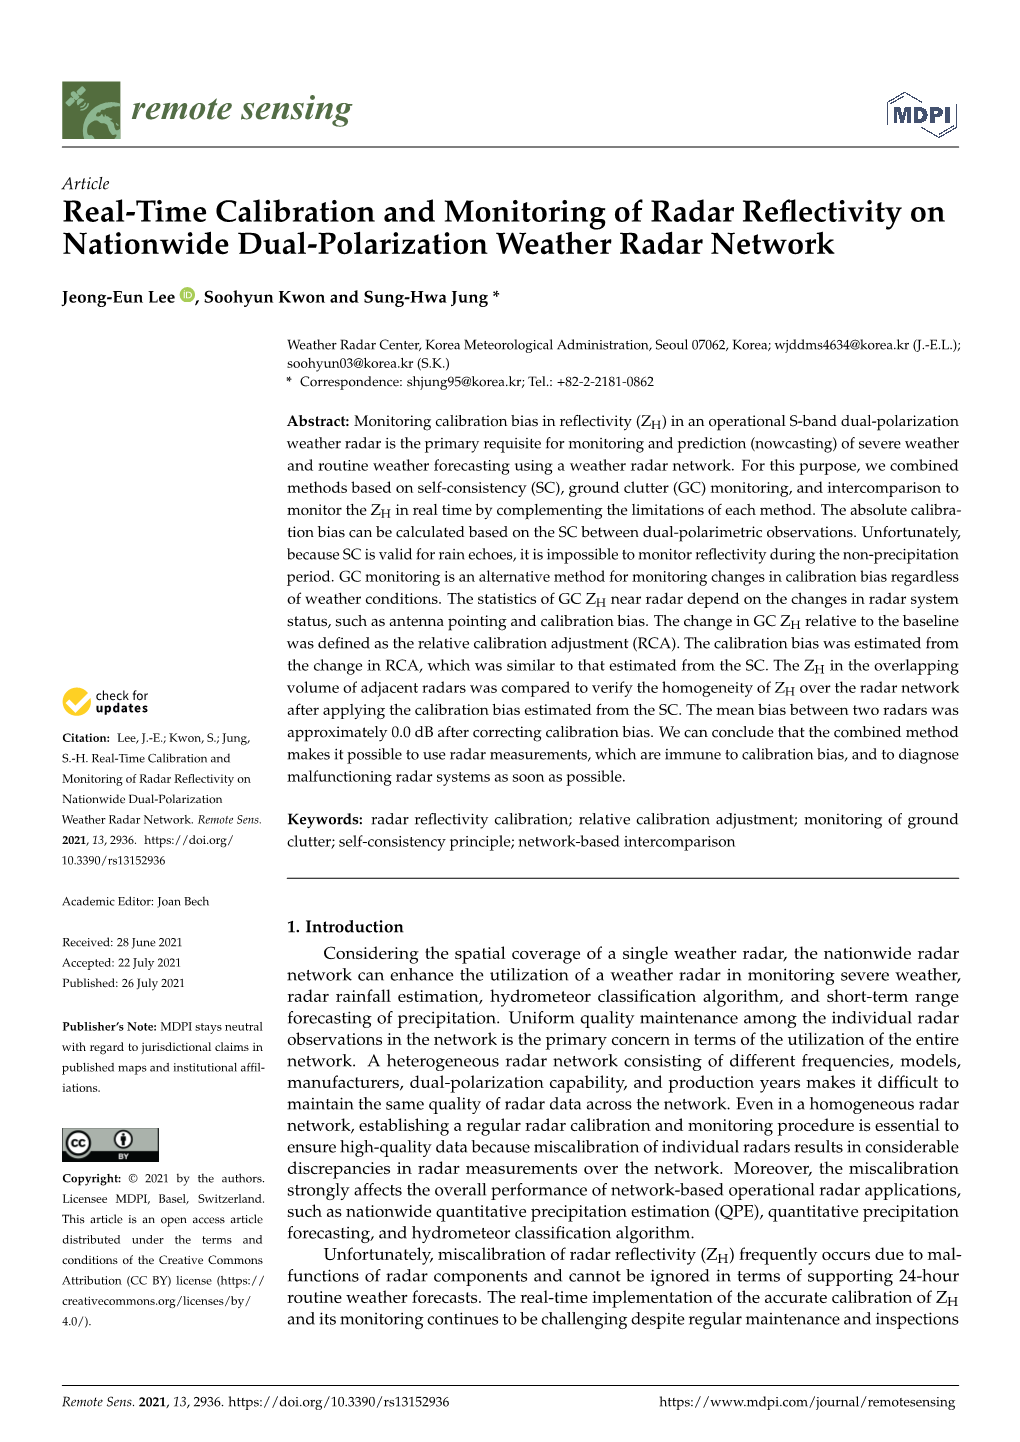 Real-Time Calibration and Monitoring of Radar Reflectivity on Nationwide